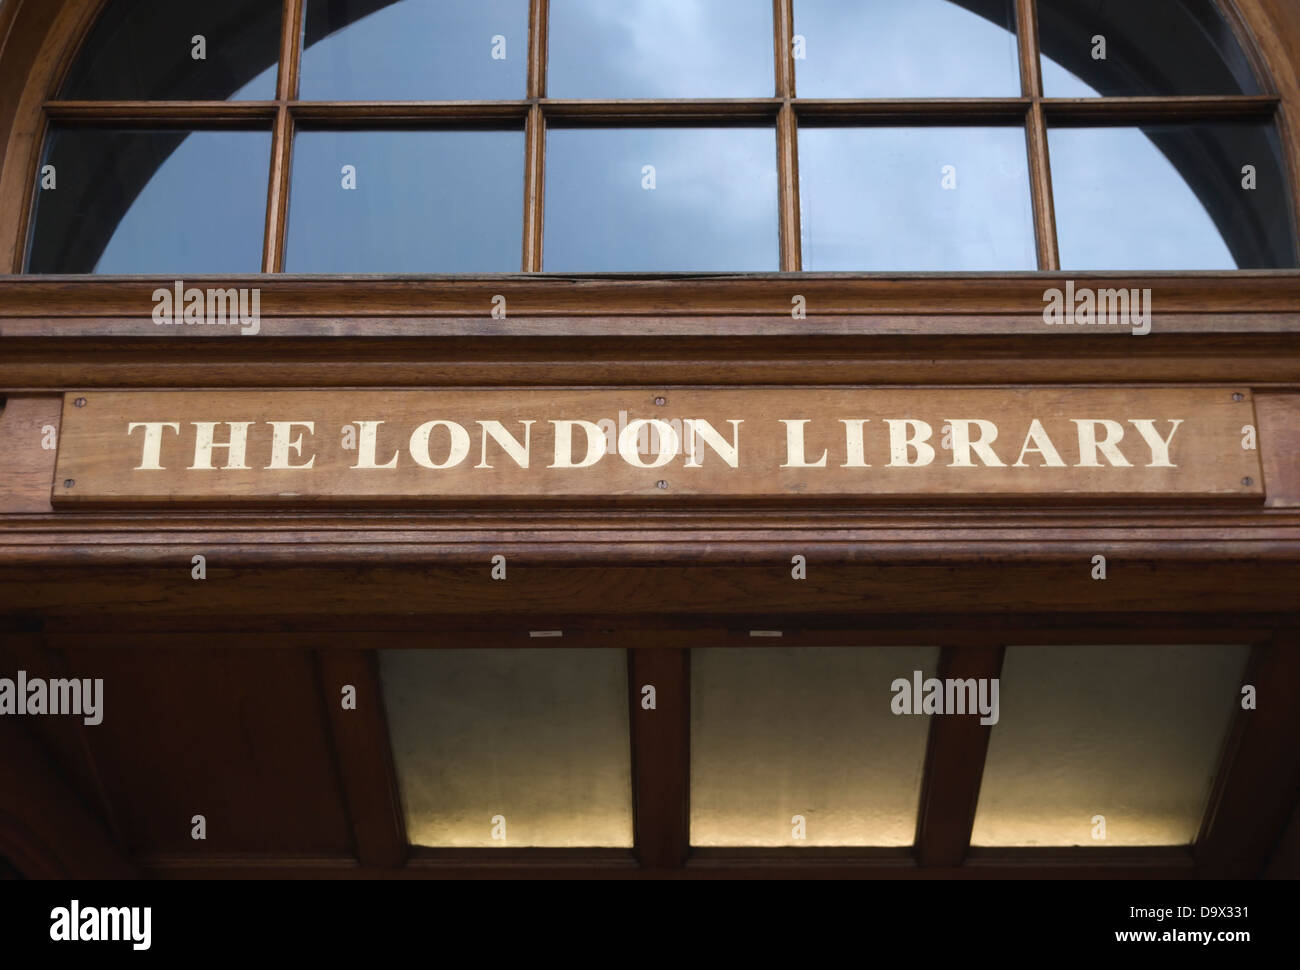 entrance detail of the london library, st james's square, london, england Stock Photo